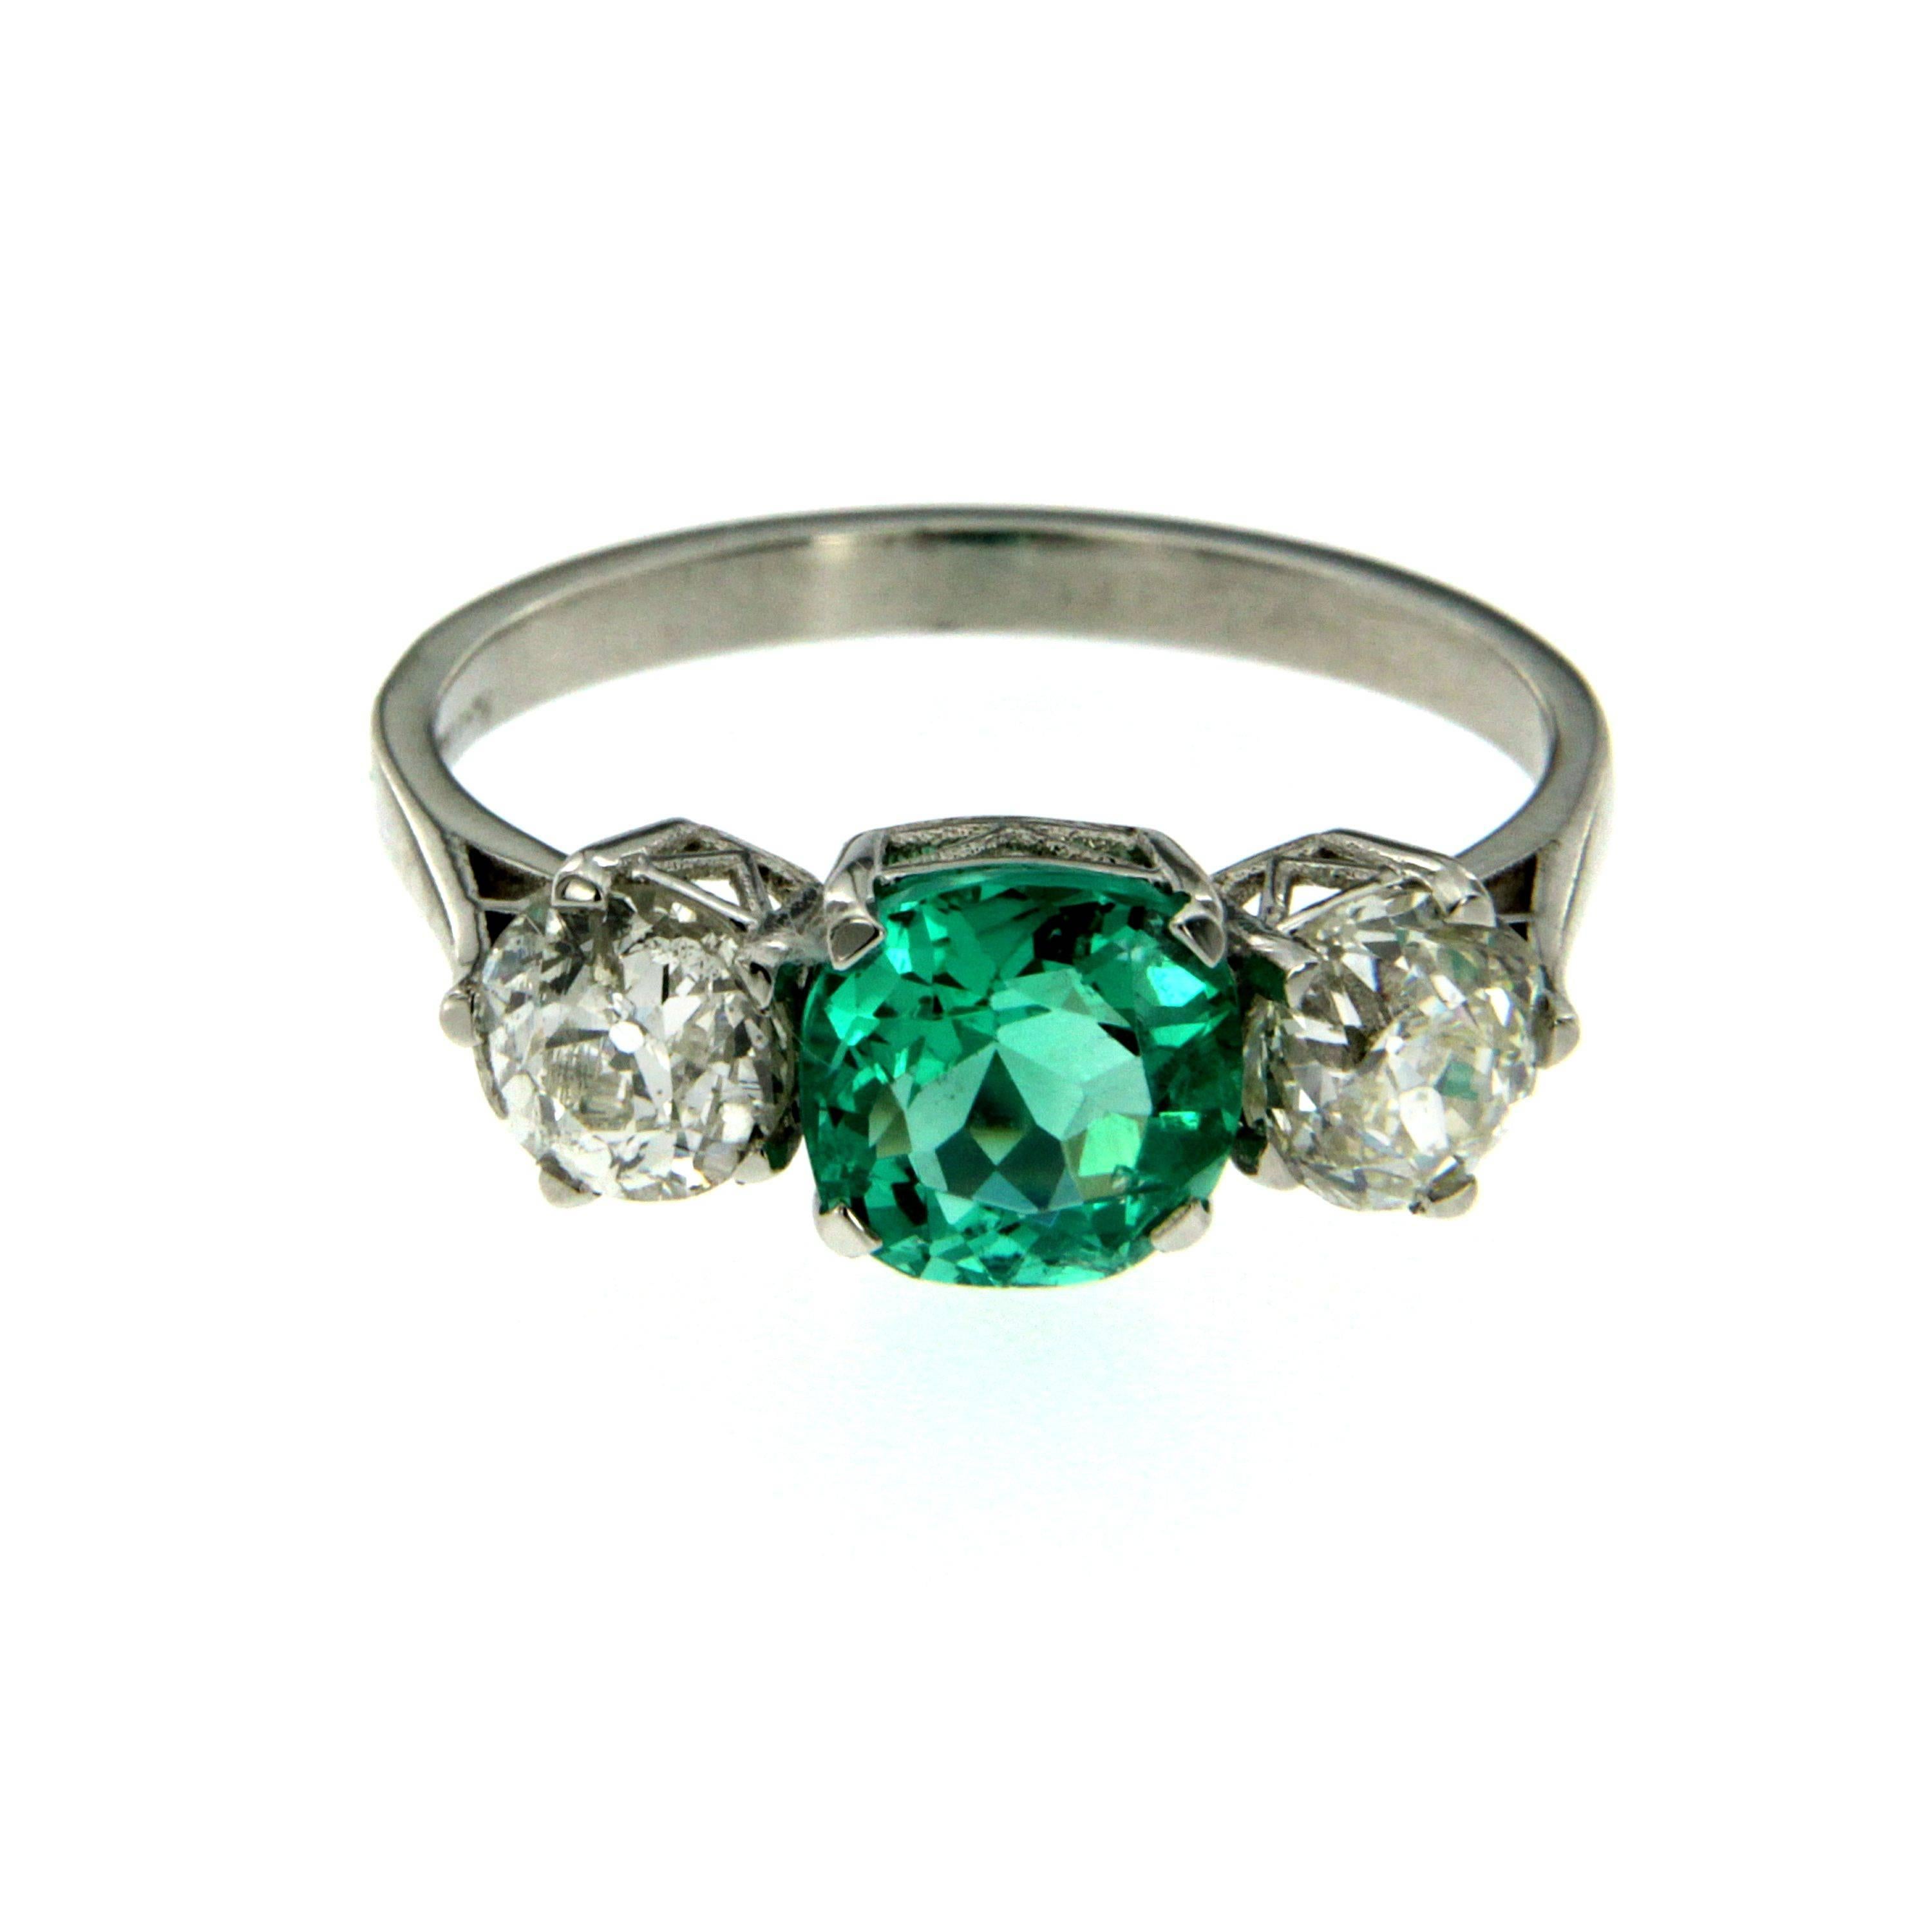 Classic three stone Platinum ring with a mixed cut Emerald weighing approximately 1.33 carats and 2 old american cut diamonds with a total weight of approximately 1.38 carats. The Emerald is free of any treatment as oil or resin.

CONDITION: